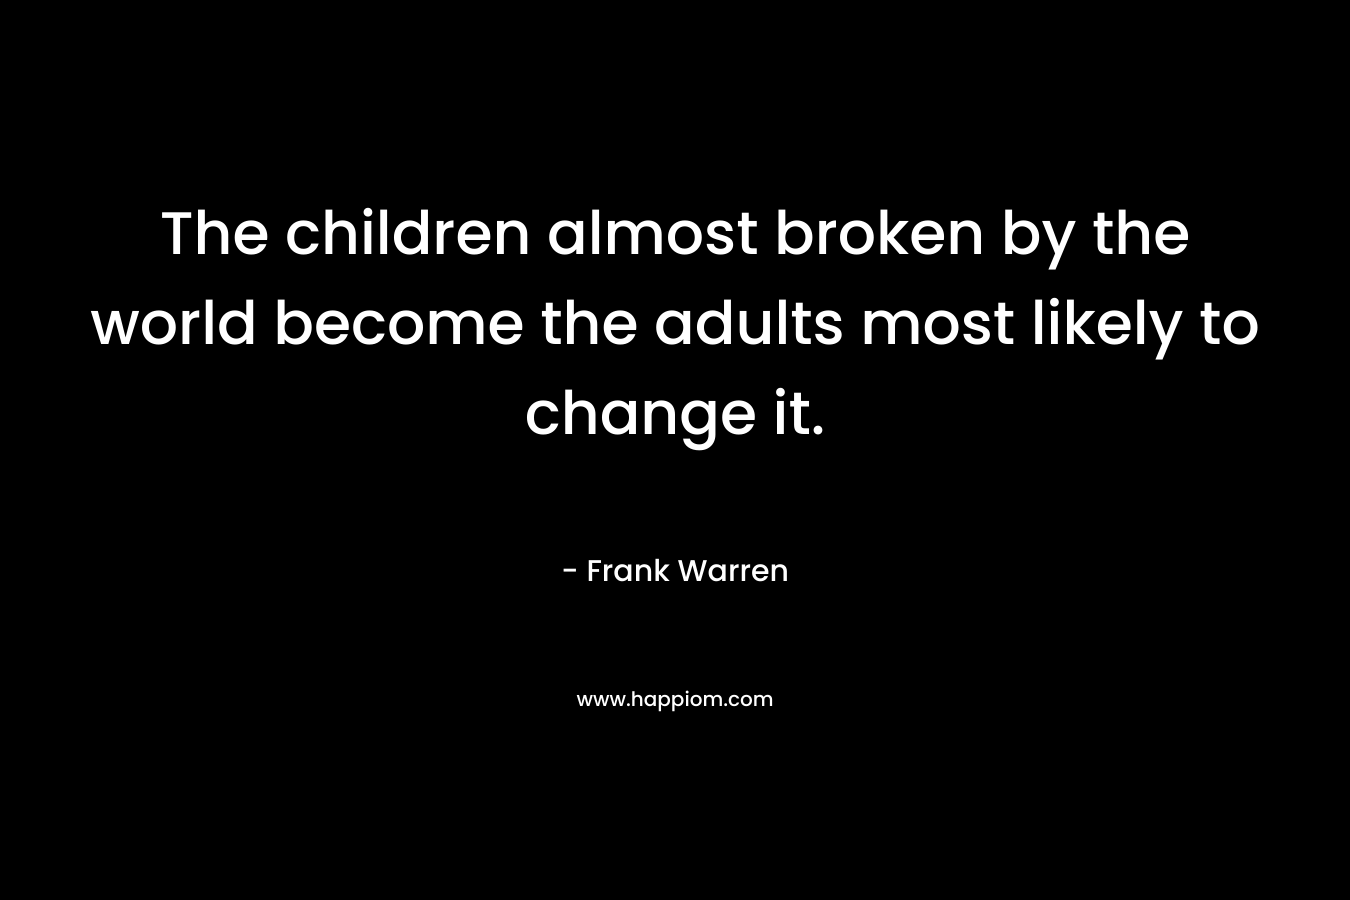 The children almost broken by the world become the adults most likely to change it.